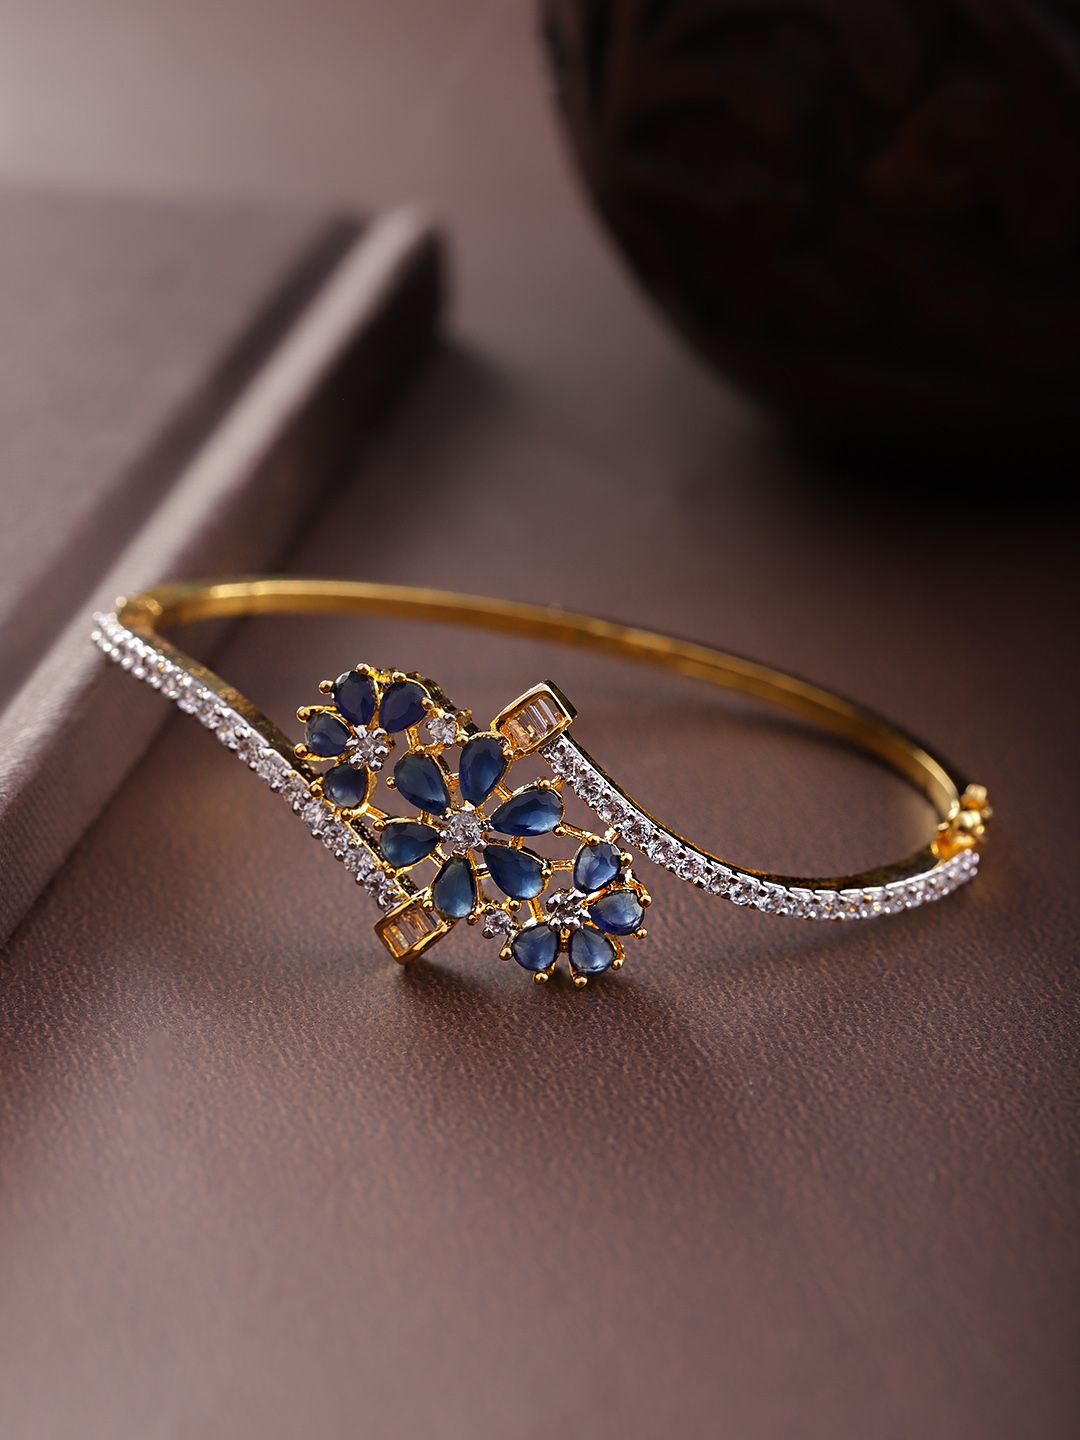 Priyaasi Navy Blue Gold-Plated Stone Studded Handcrafted Bangle Style Bracelet Price in India